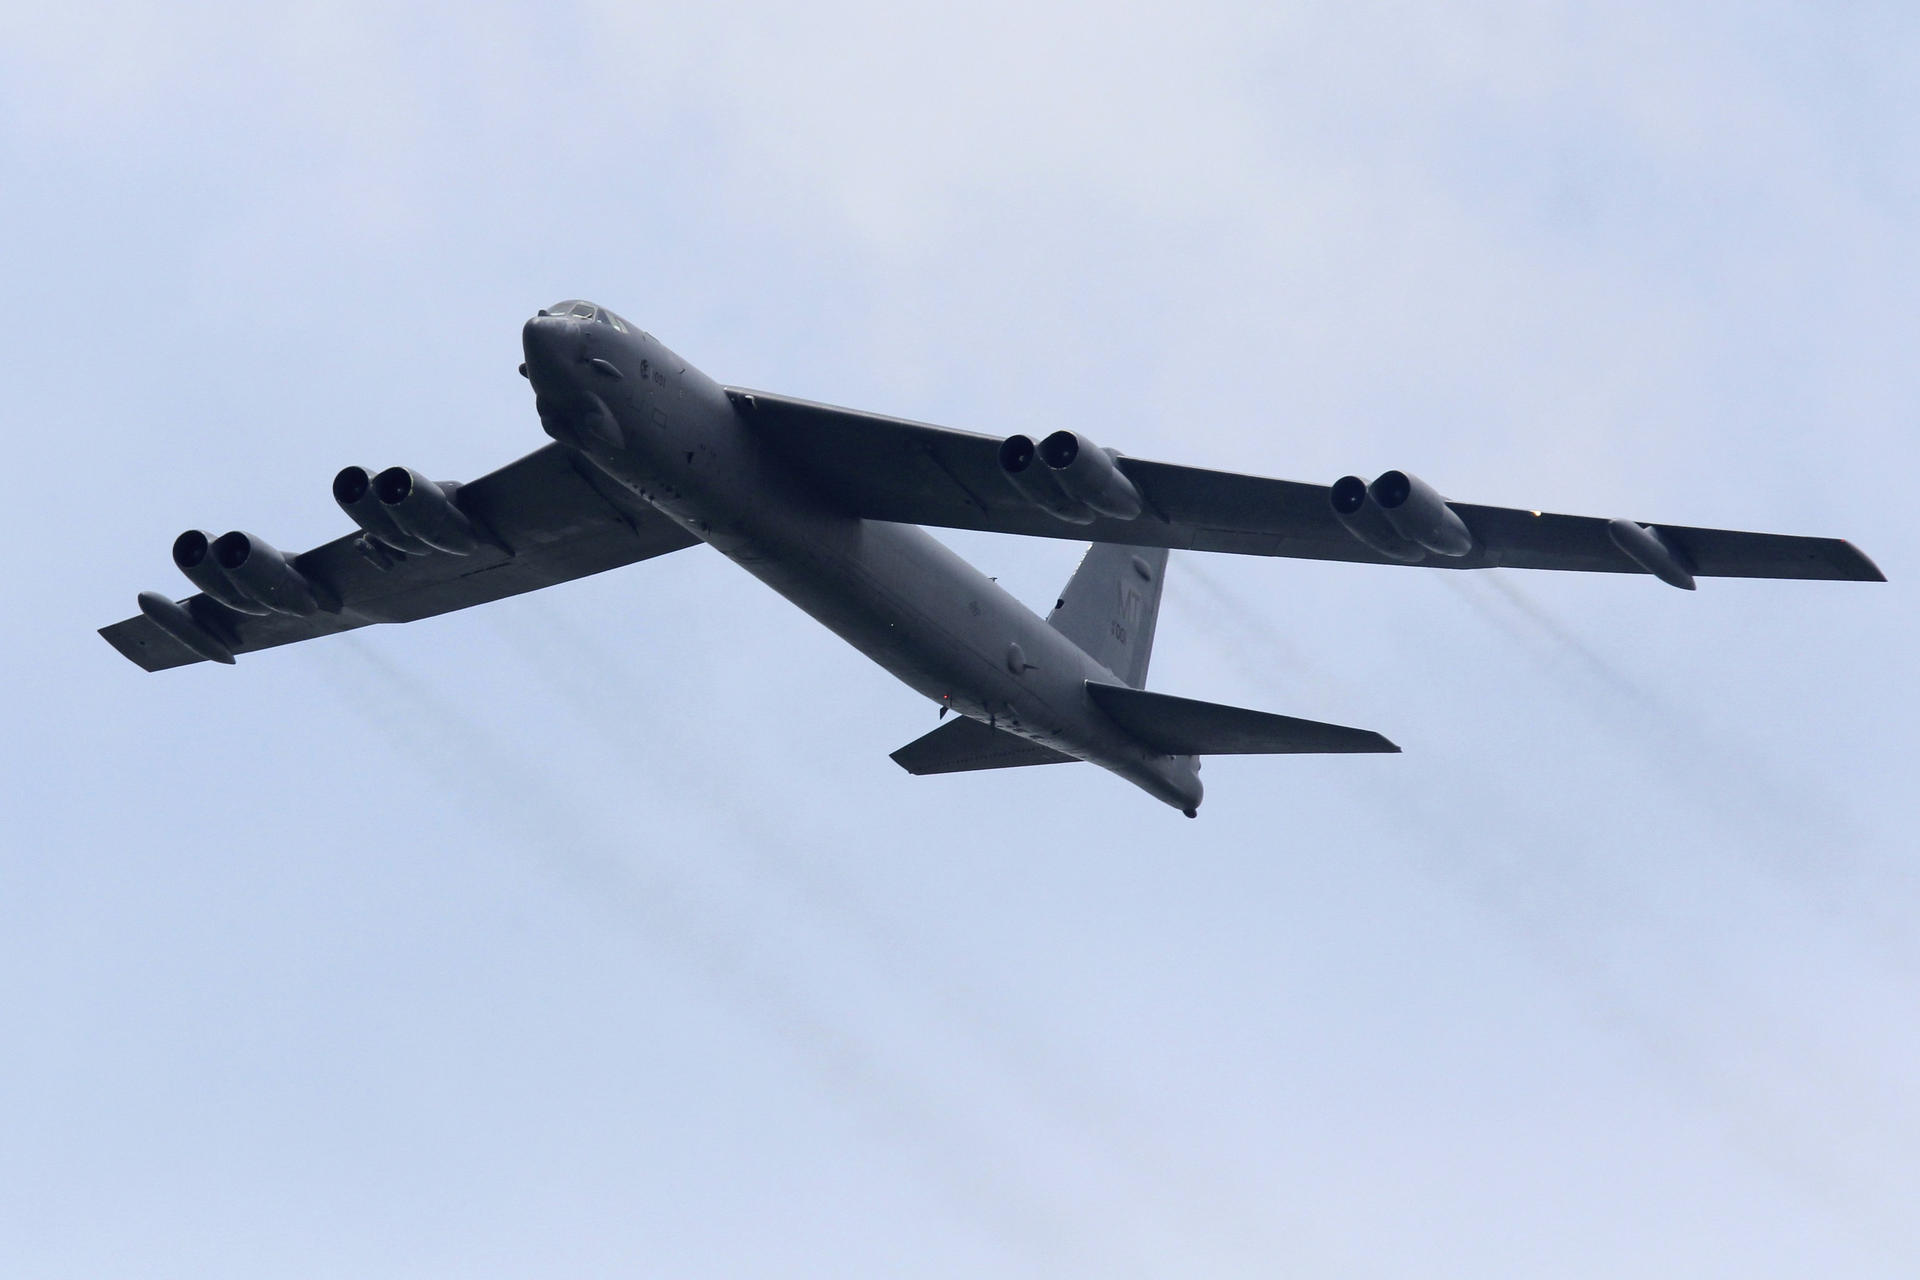 A U.S. Air Force Boeing B-52 Stratofortress strategic bomber. A similar  bomber flew near artificial Chinese islands in the South China Sea recently. Photo: Reuters